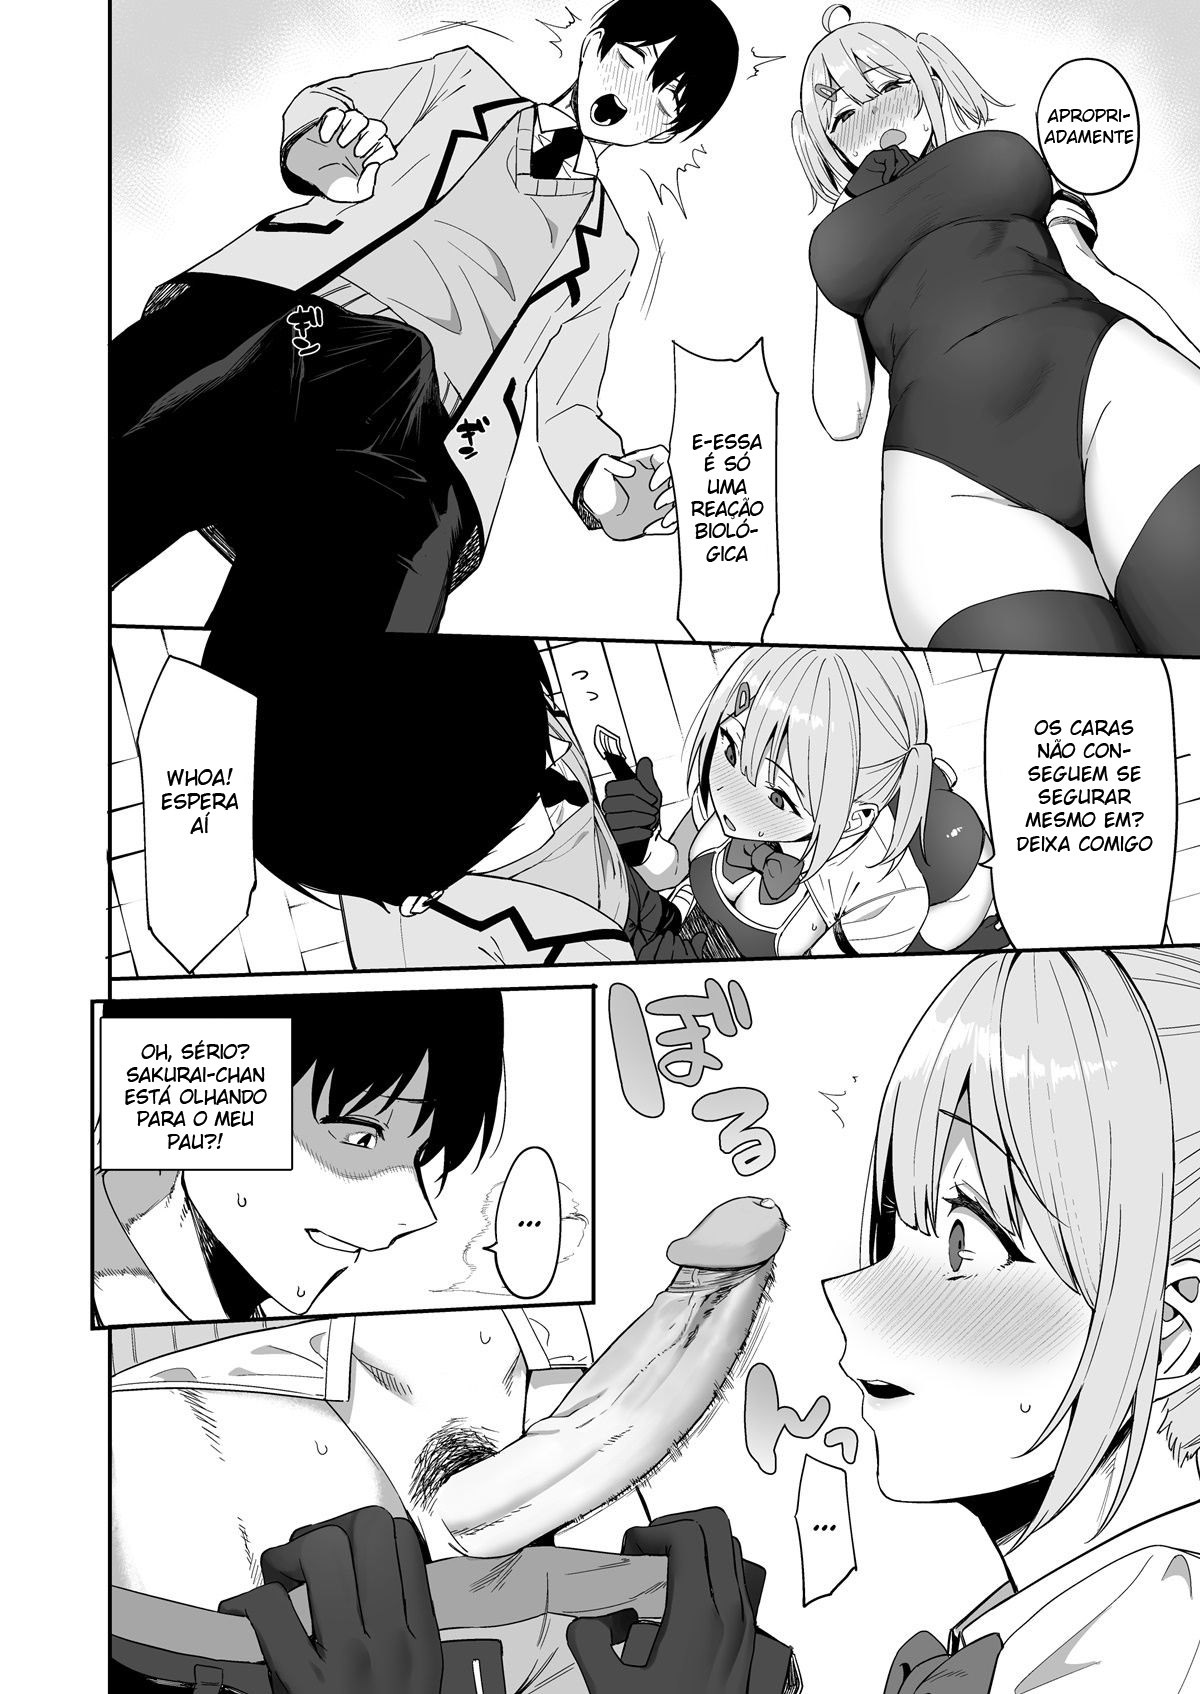 SEX ACTS With a Member Of The Public Moral Committee  Hentai pt-br 14